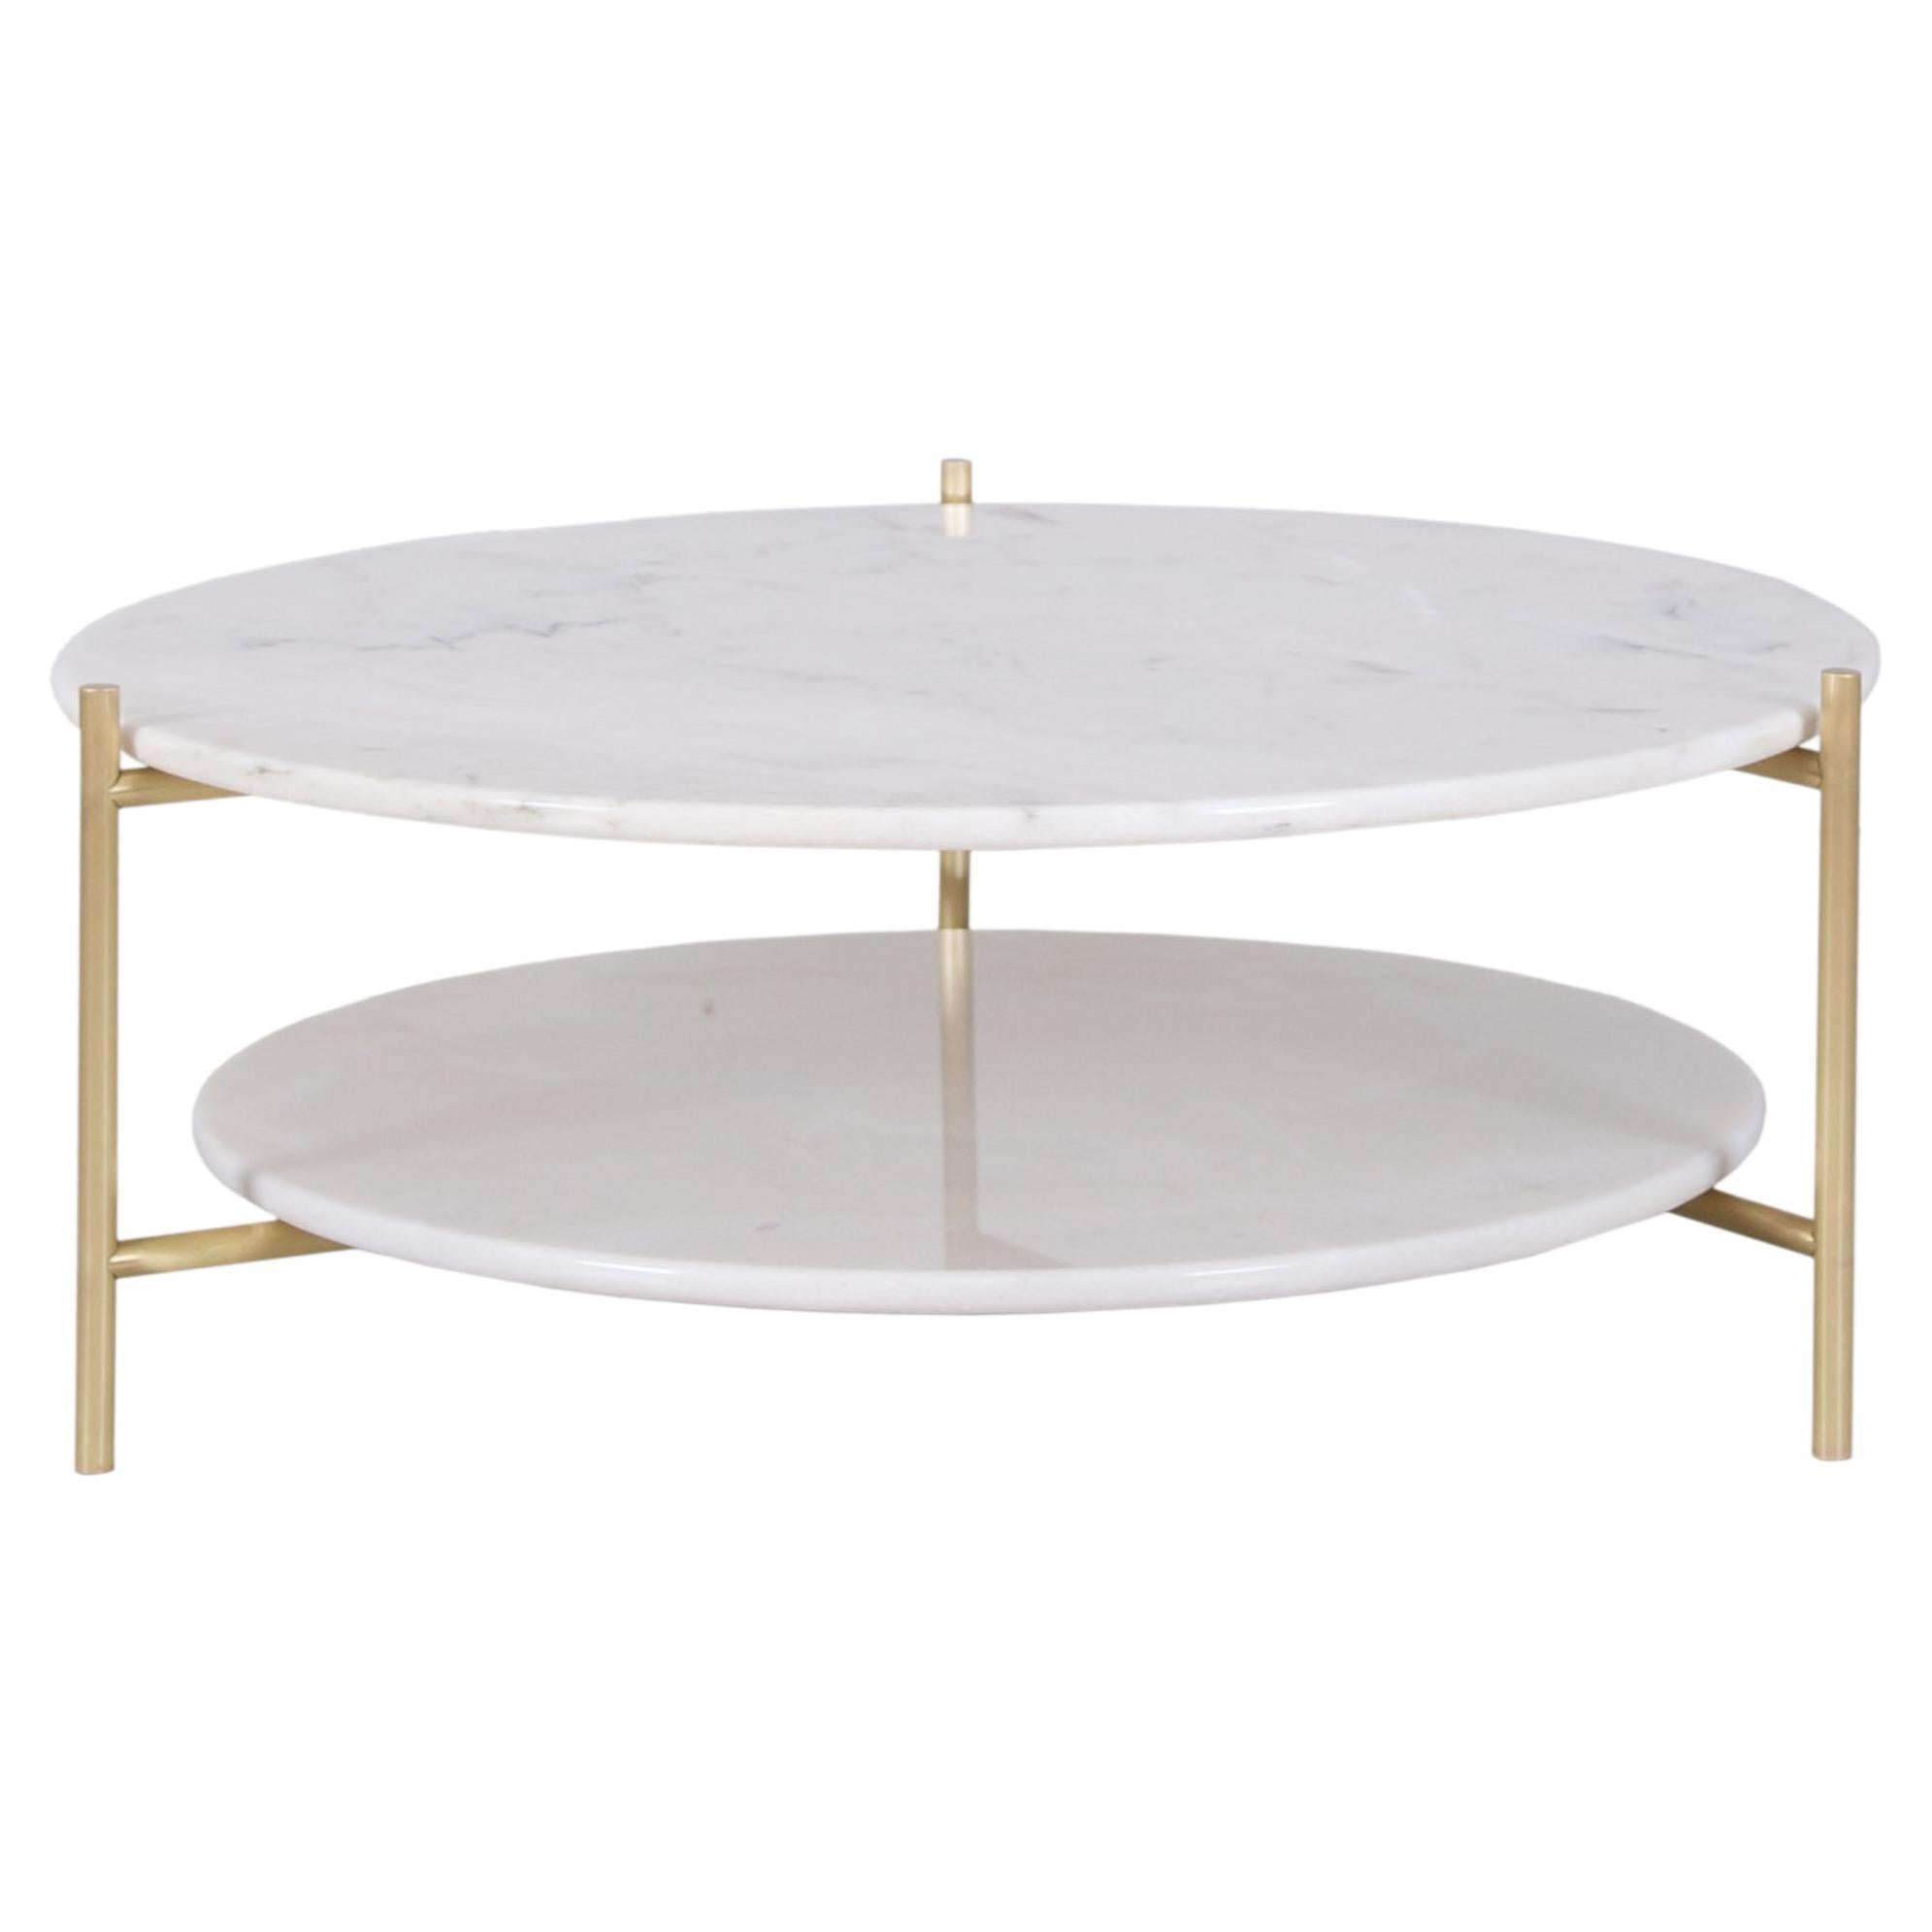 Modern Outdoors Coffee Table in Calacatta Bianco Marble by Greenapple